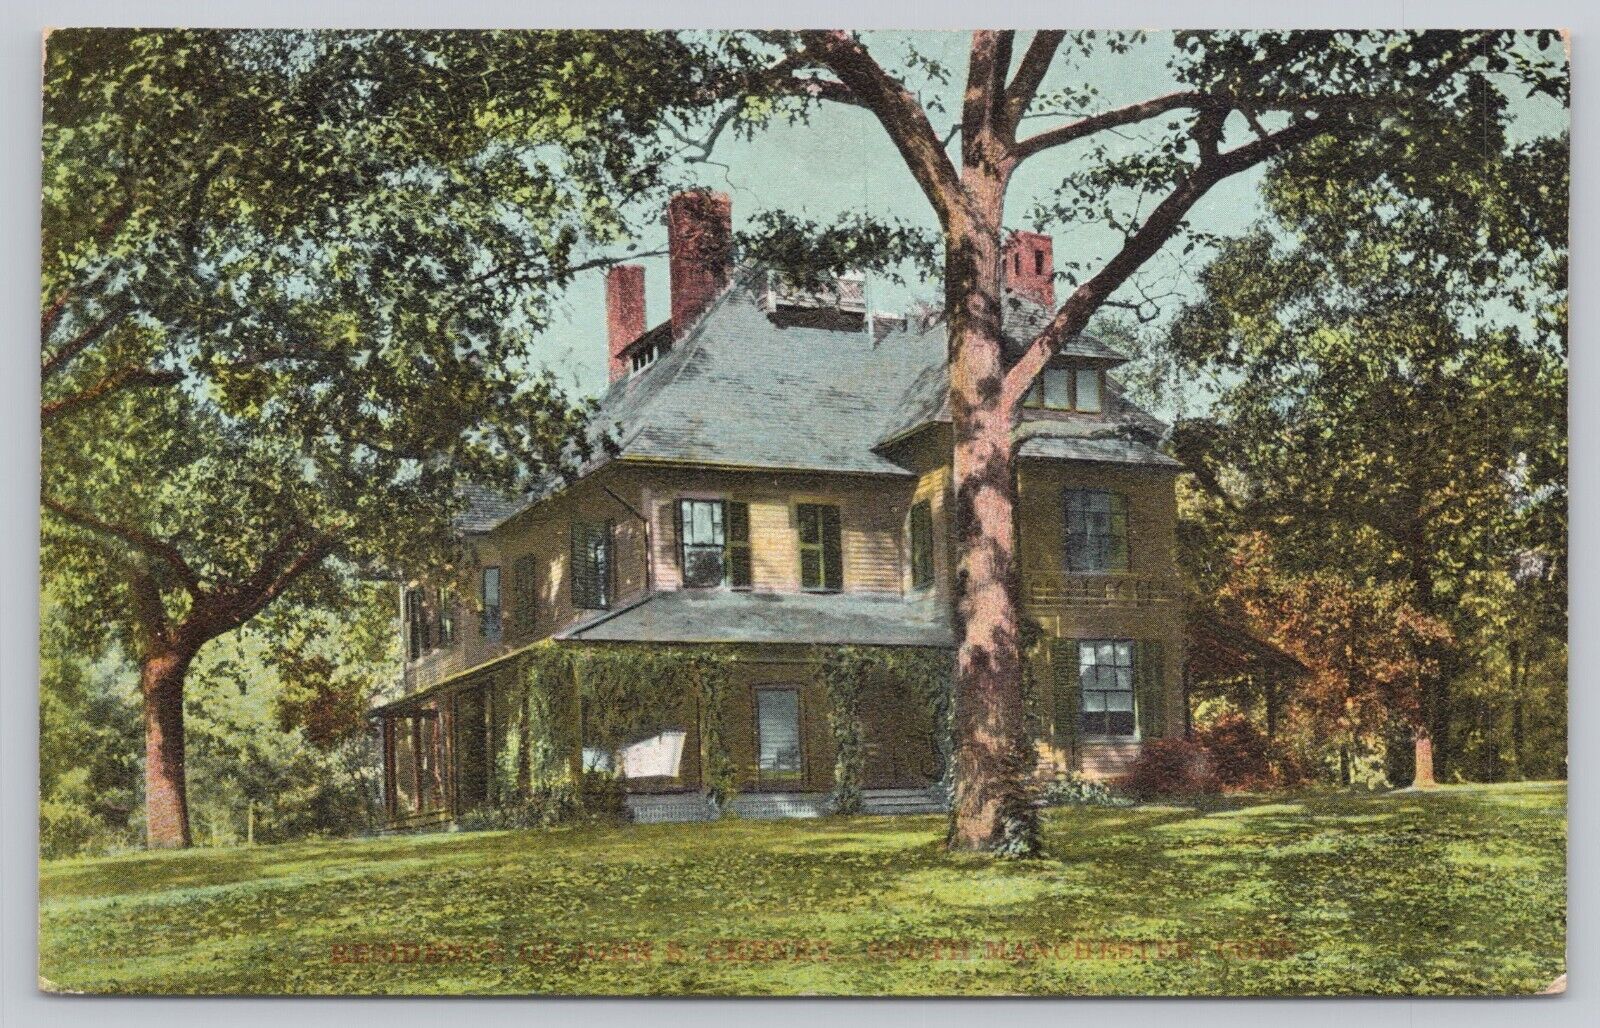 South Manchester Connecticut, John S Cheney Residence, Vintage Postcard